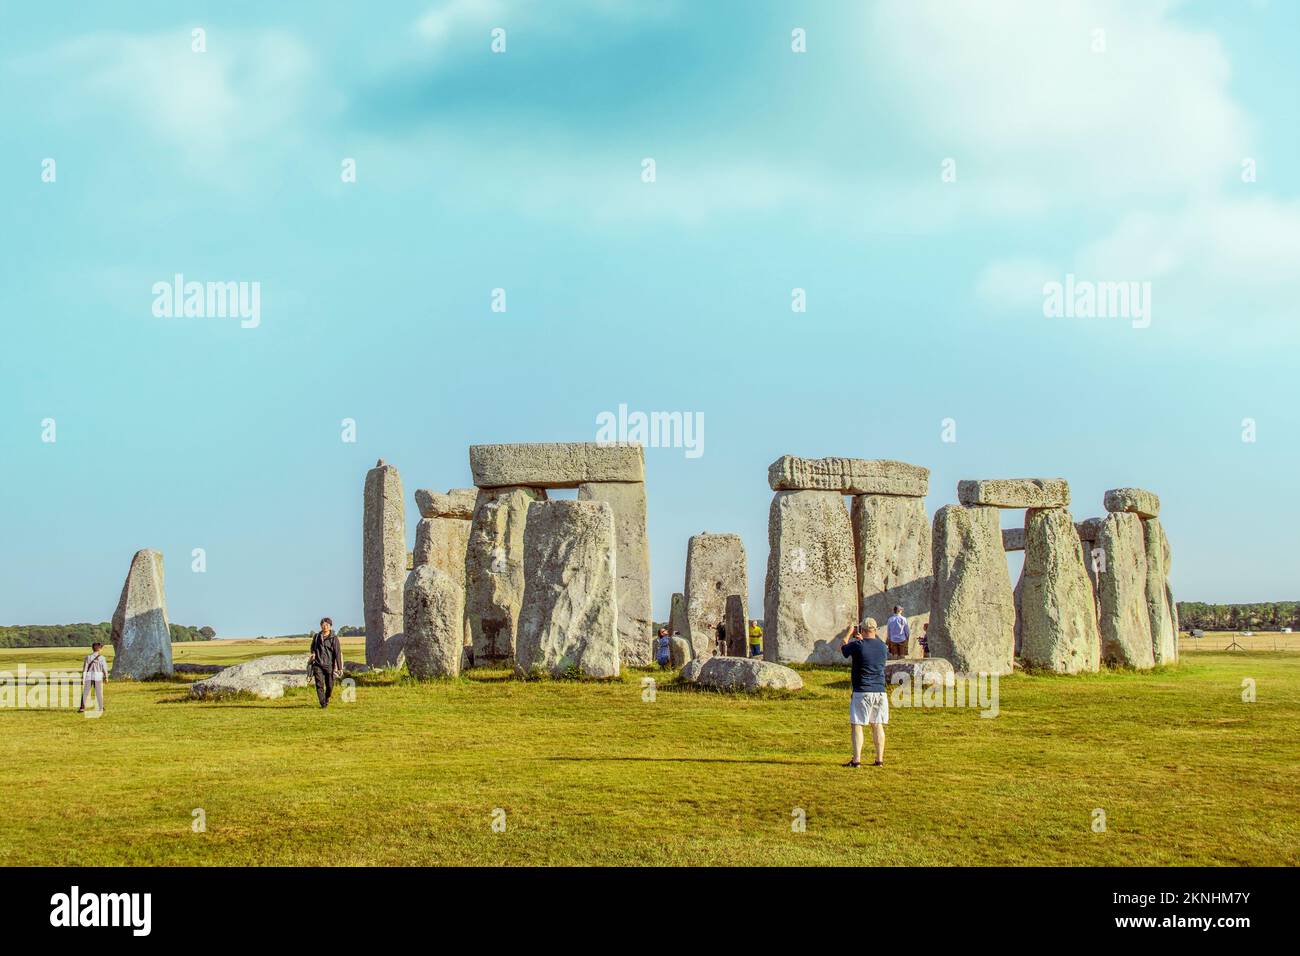 7-24-2019 Salisbury  UK - Tourists walking among the stones at Stonehenge taking pictures of a bright sunny day Stock Photo